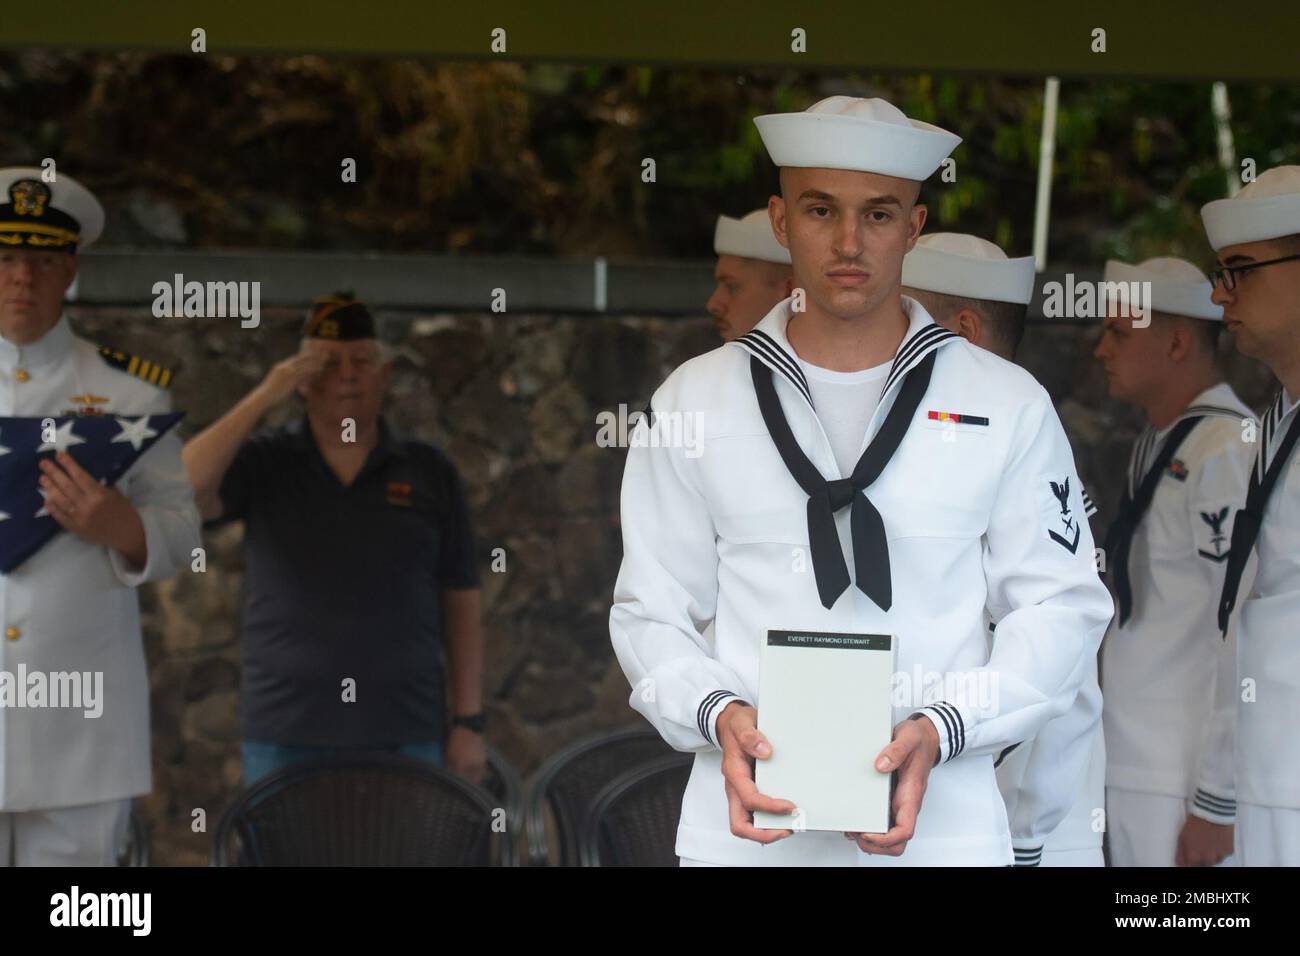 Sailors assigned to U.S. Navy Region Hawaii conduct an internment ceremony for U.S. Navy Machinist's Mate 2nd Class Everett Raymond Stewart, of California, at the National Memorial Cemetery of the Pacific, Honolulu, Hawaii, June 16, 2022. Stewart was assigned to the USS Oklahoma, which sustained fire from Japanese aircraft and multiple torpedo hits causing the ship to capsize and resulted in the deaths of more than 400 crew members on Dec. 7, 1941, at Ford Island, Pearl Harbor. Stewart was recently identified through DNA analysis by the Defense POW/MIA Accounting Agency (DPAA) forensic laborat Stock Photo